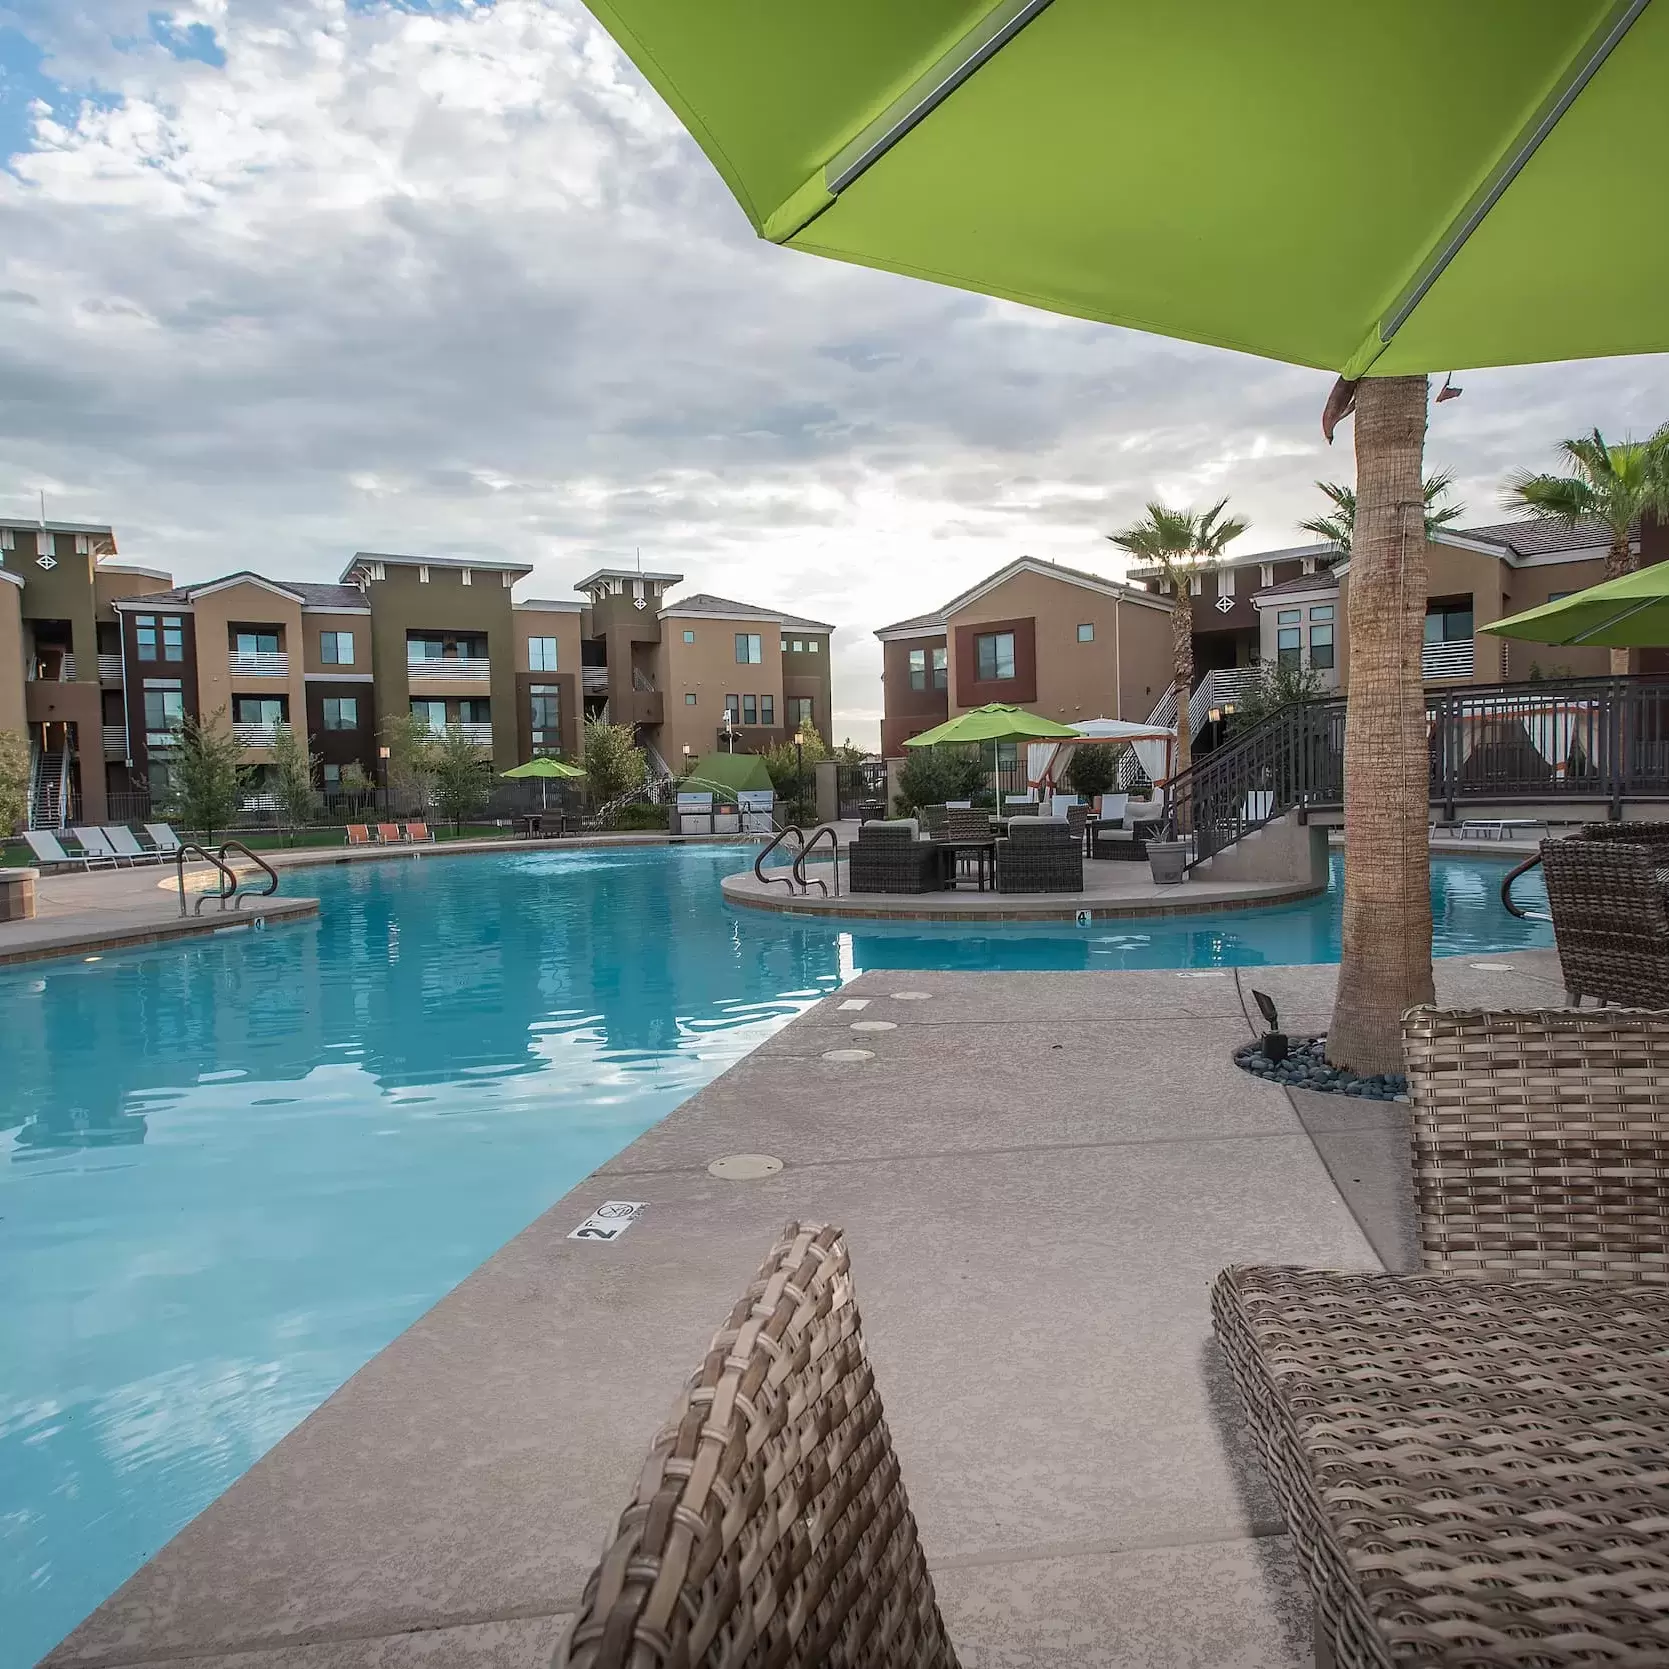 Chairs and tables with umbrellas on the pool deck at the luxury apartment complex.